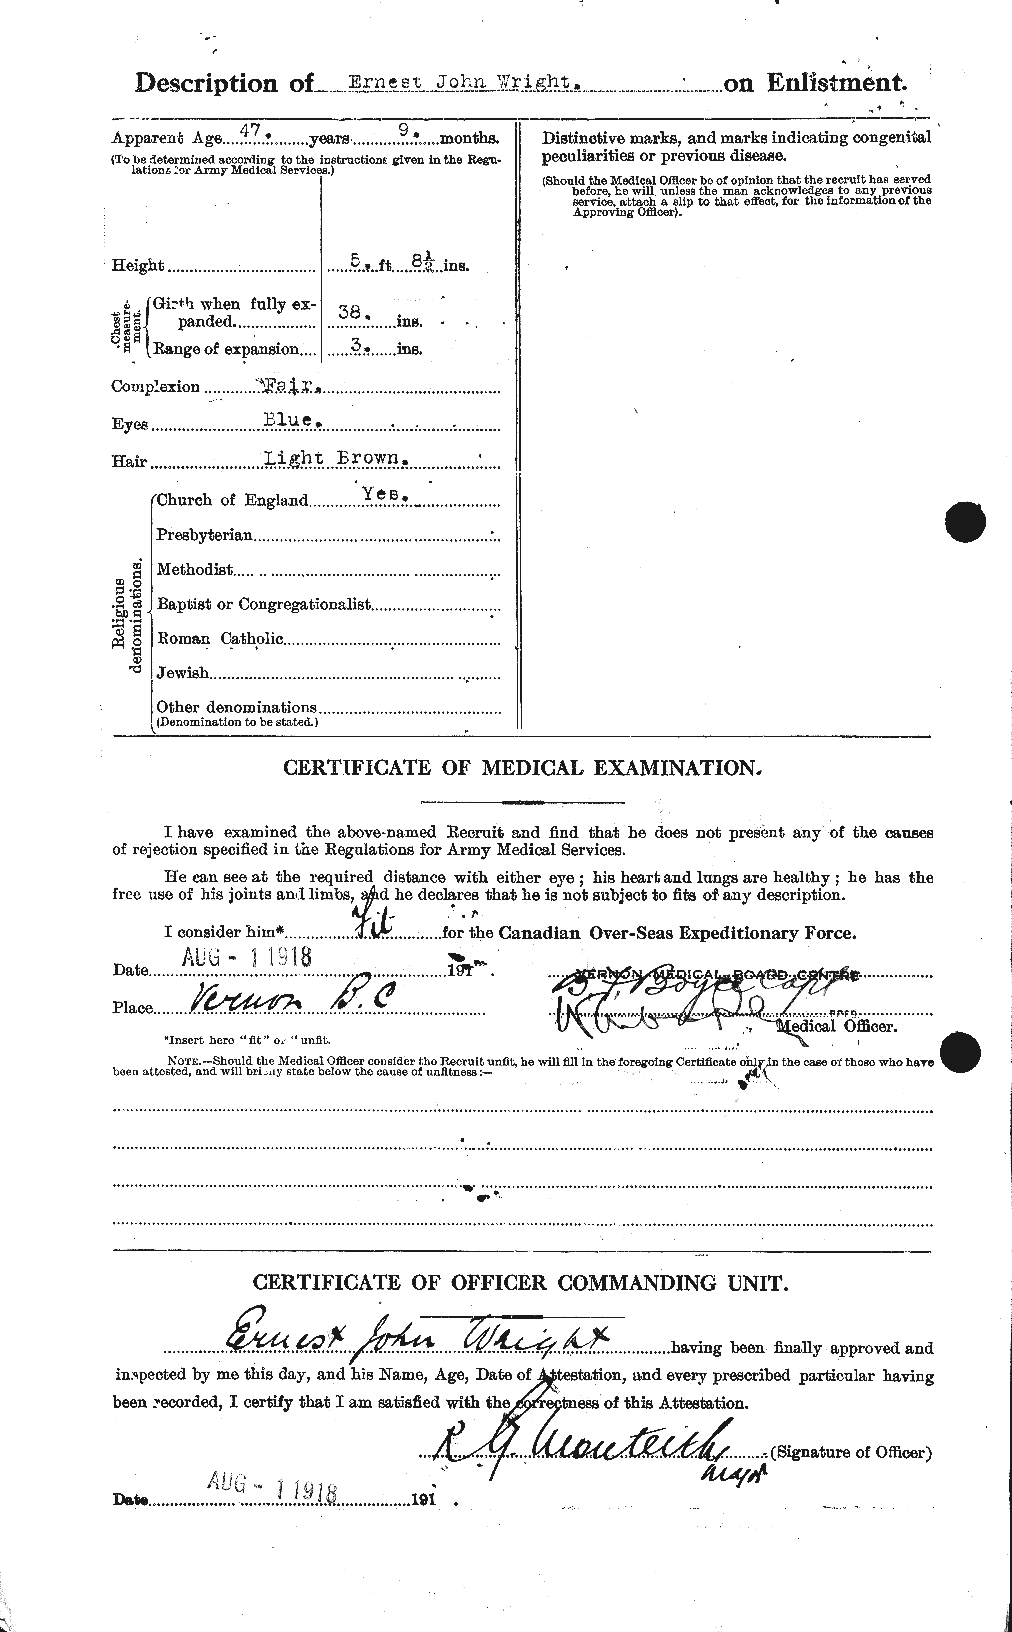 Personnel Records of the First World War - CEF 683876b